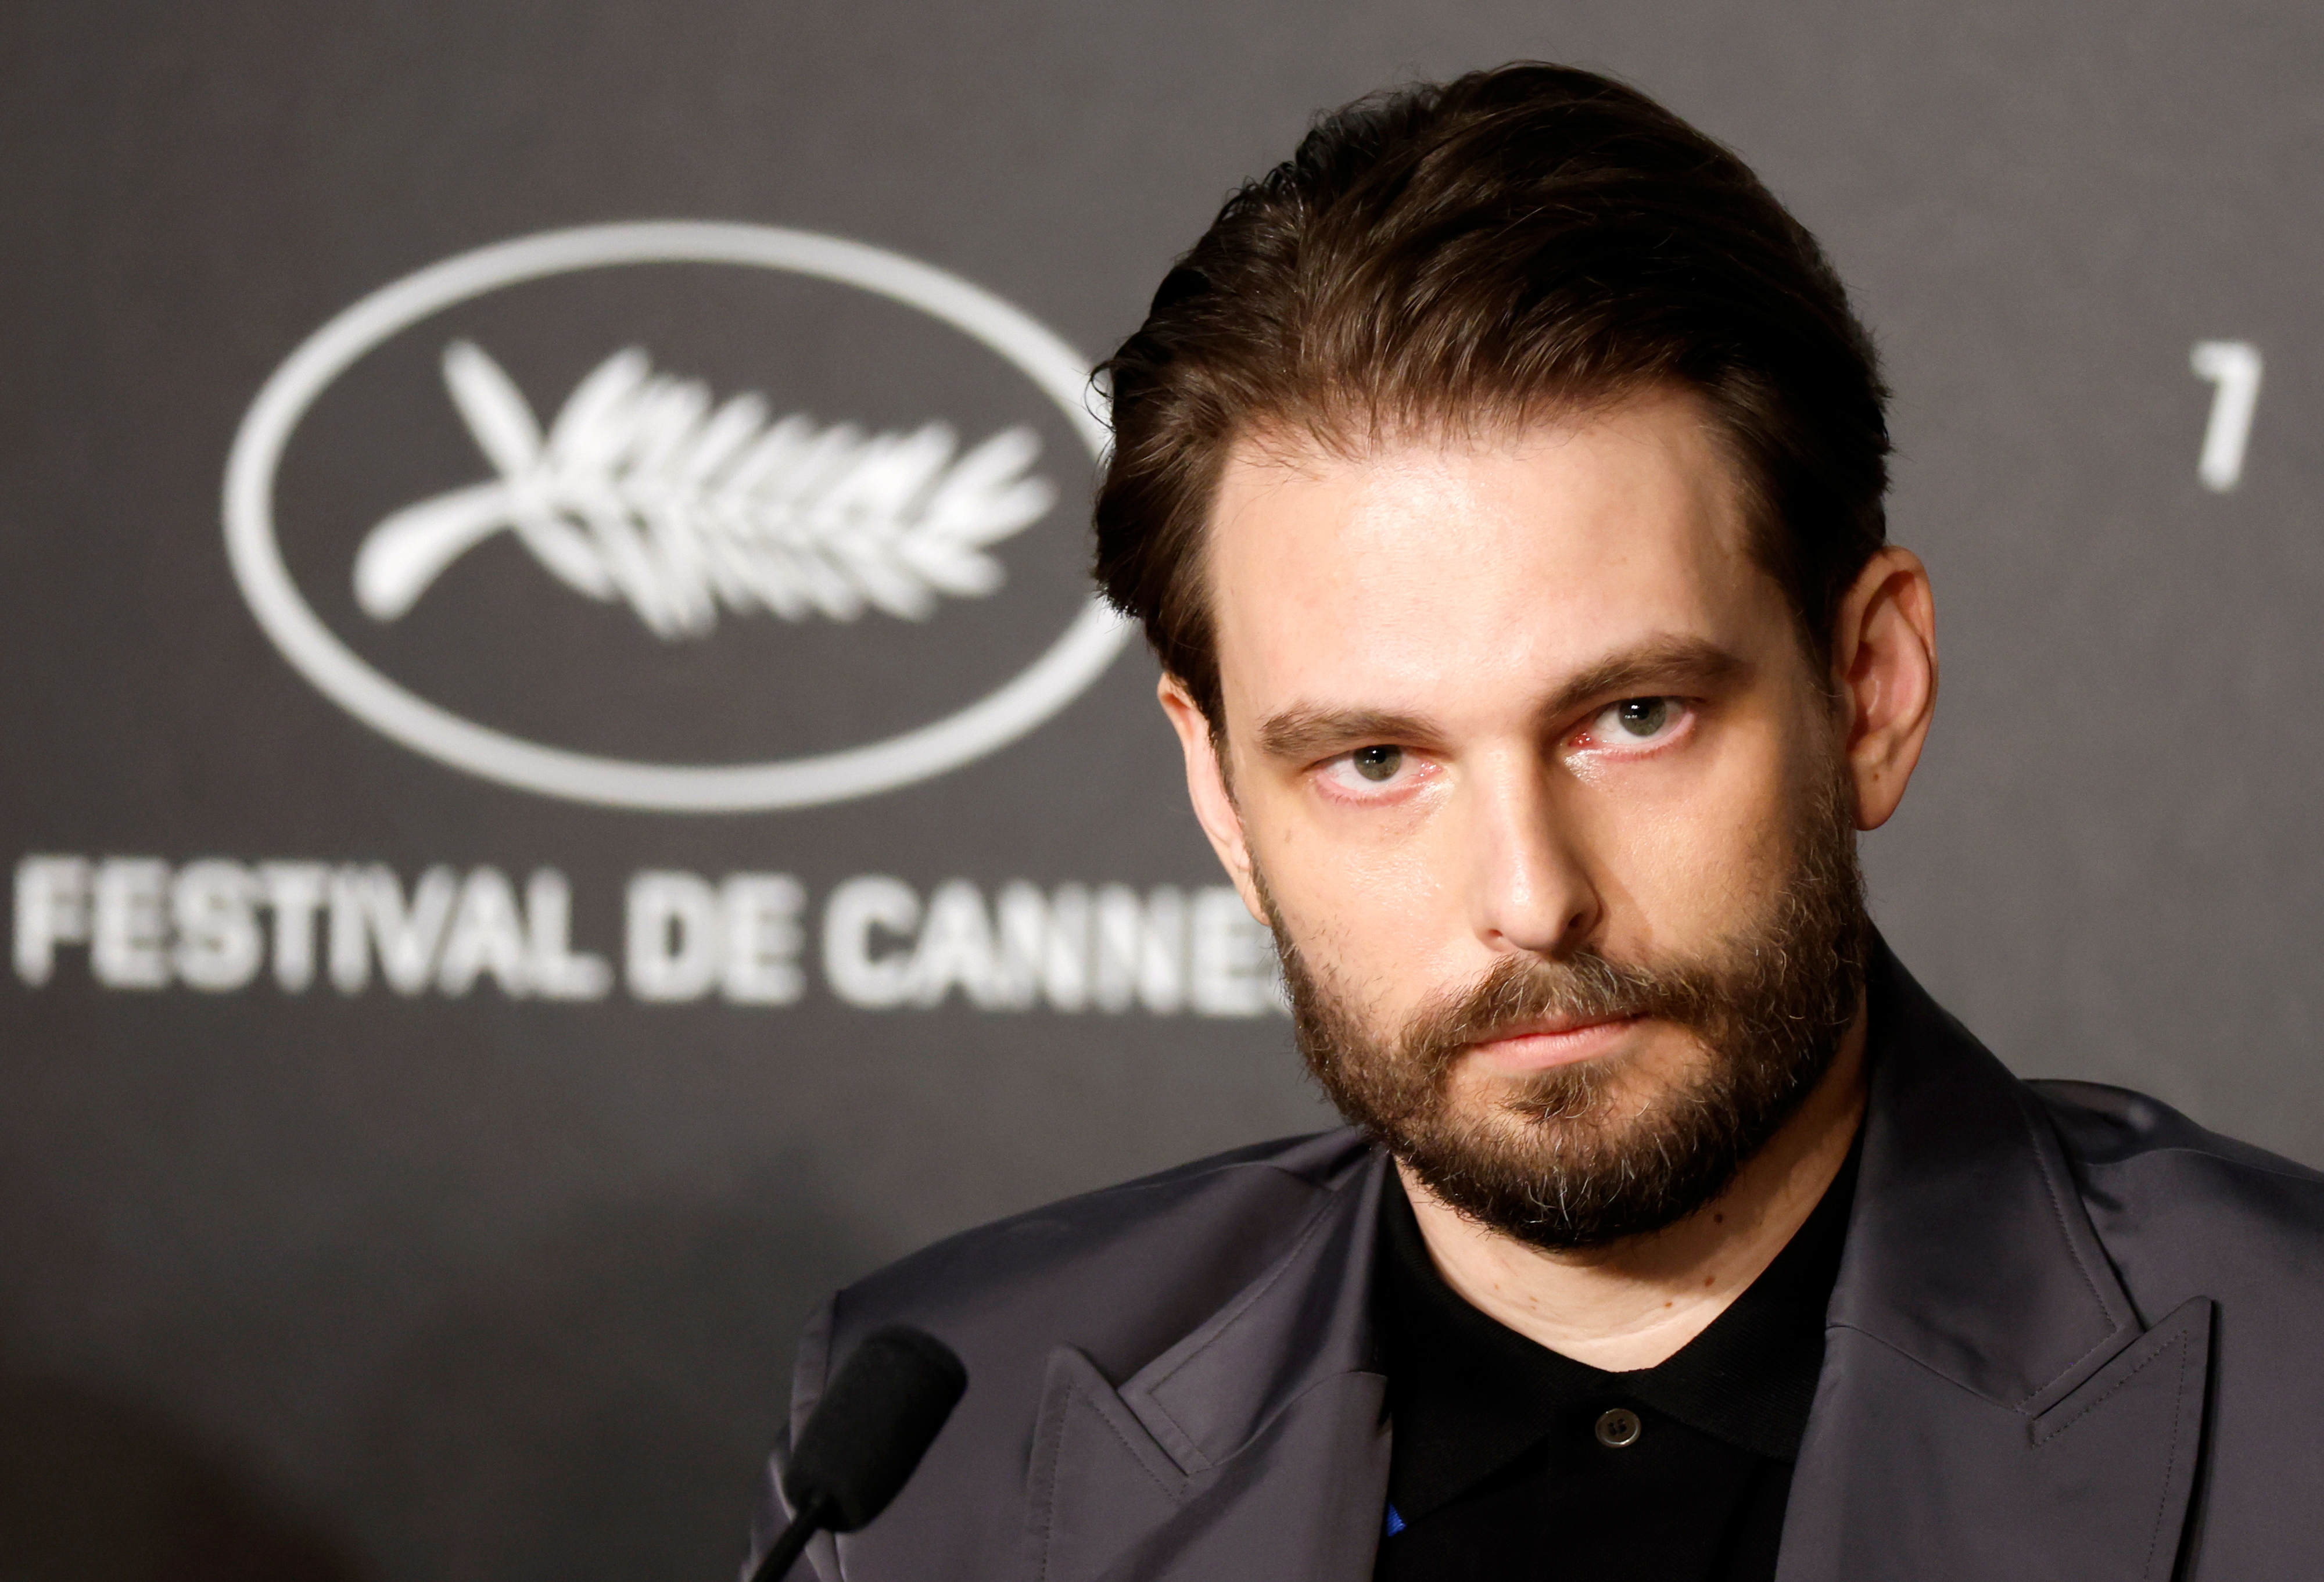 A close-up of Sam Levinson at the Cannes Film Festival